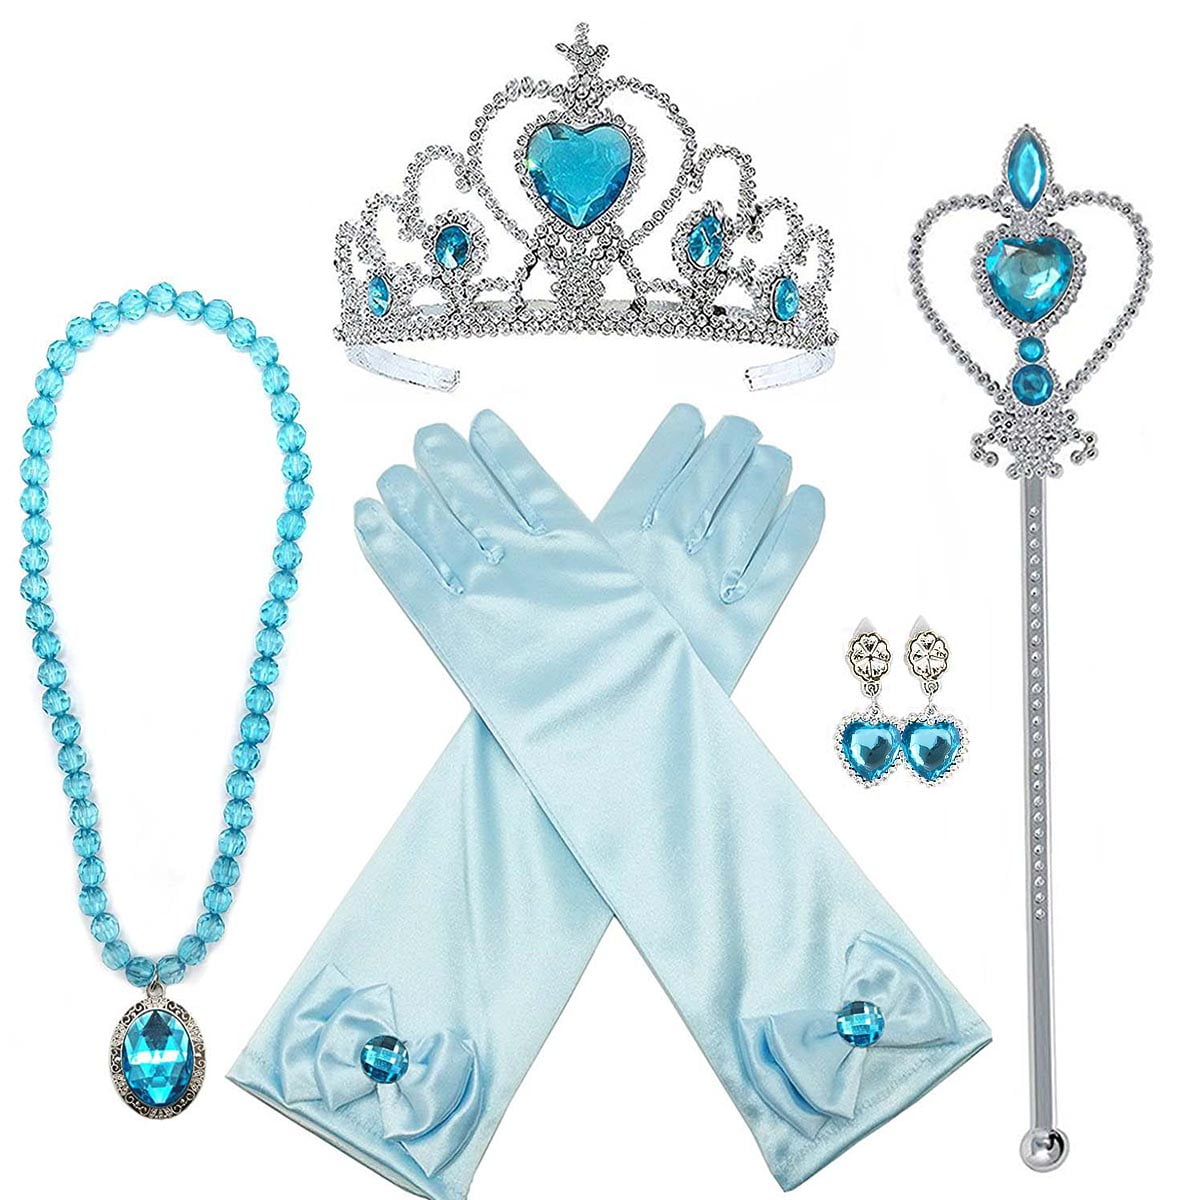 girls princess dress up costumes and accessories jewelry 